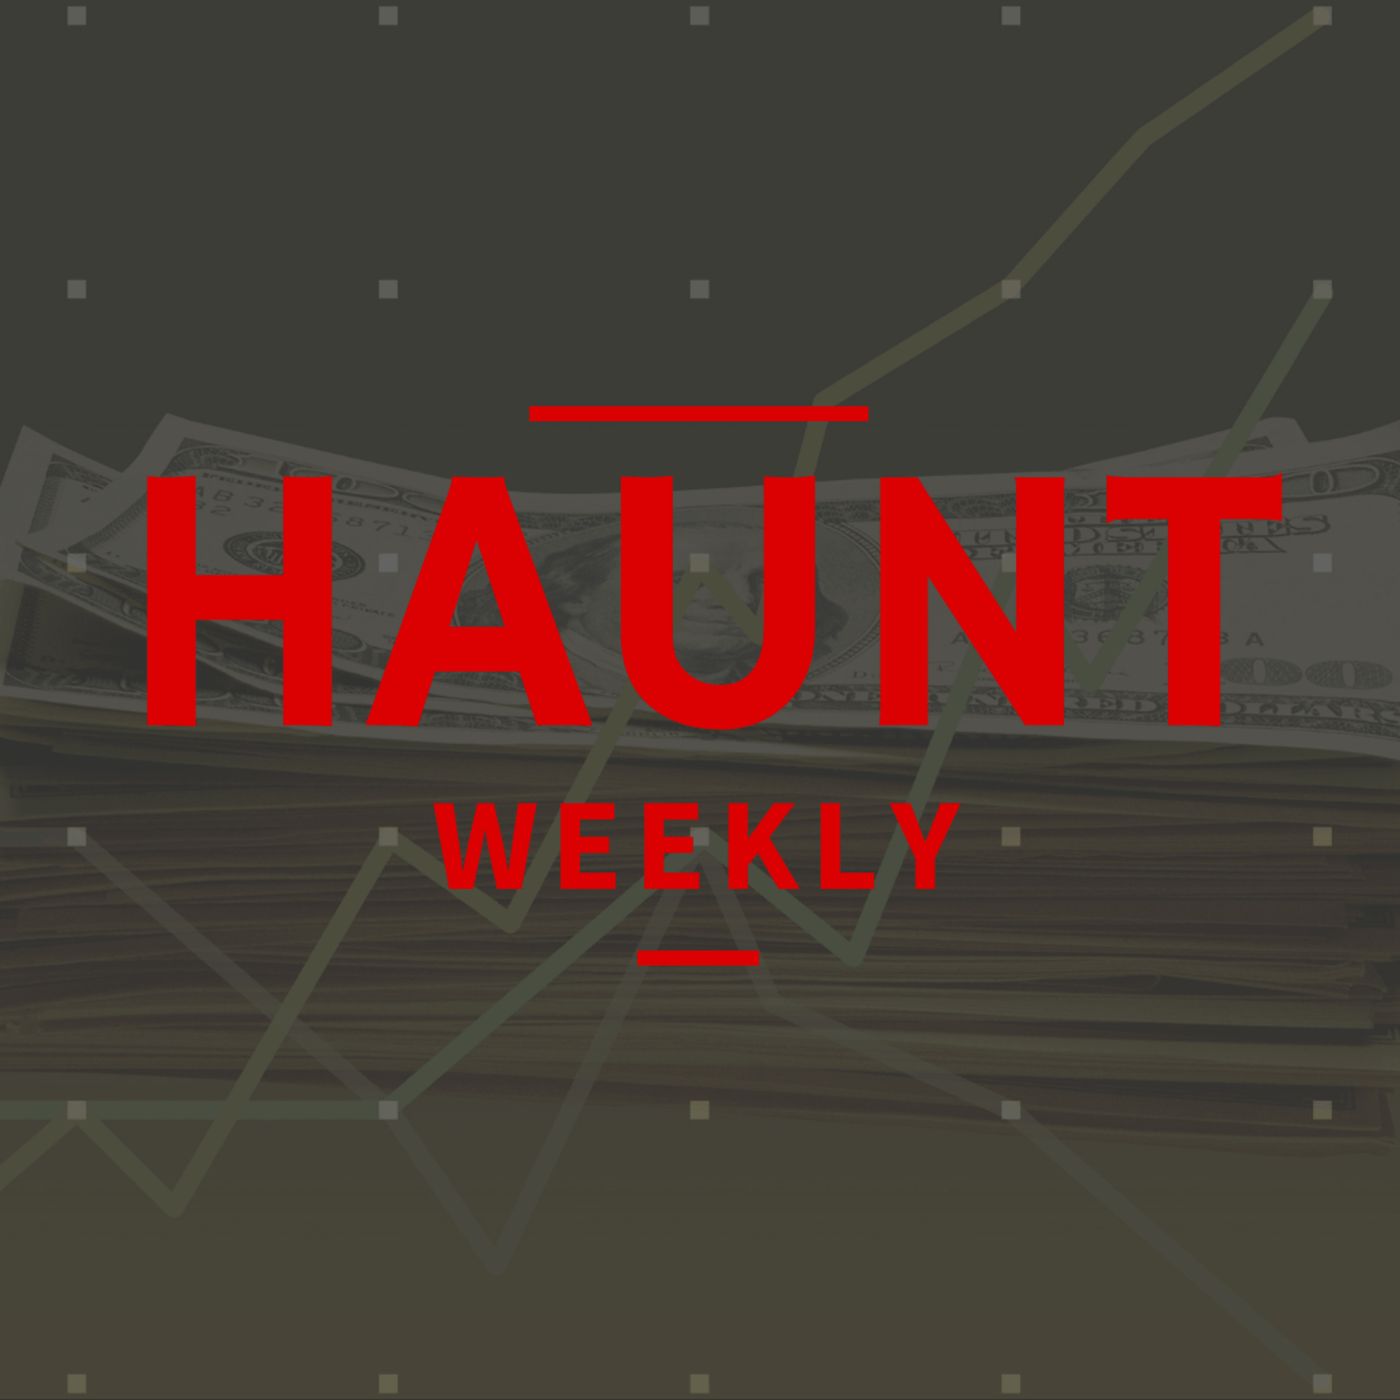 [Haunt Weekly] Episode 207 - How to Raise Your Prices (Without Angering Your Customers)